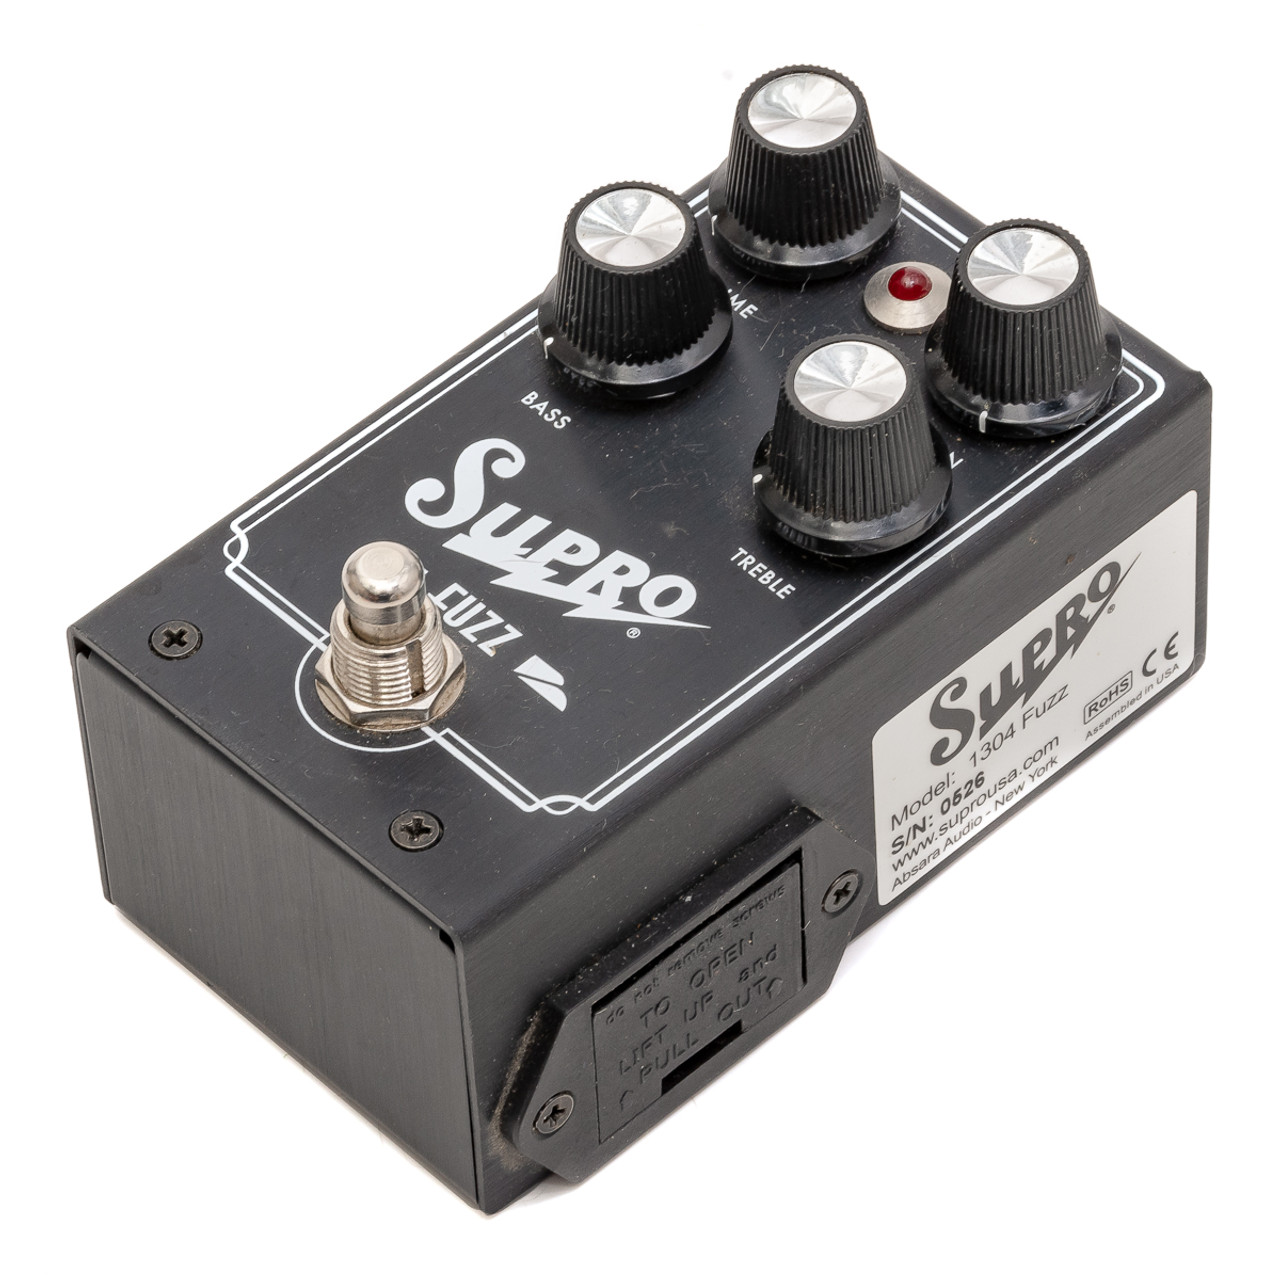 Supro - Fuzz Pedal - x7394 (USED) (ISS37393-1)